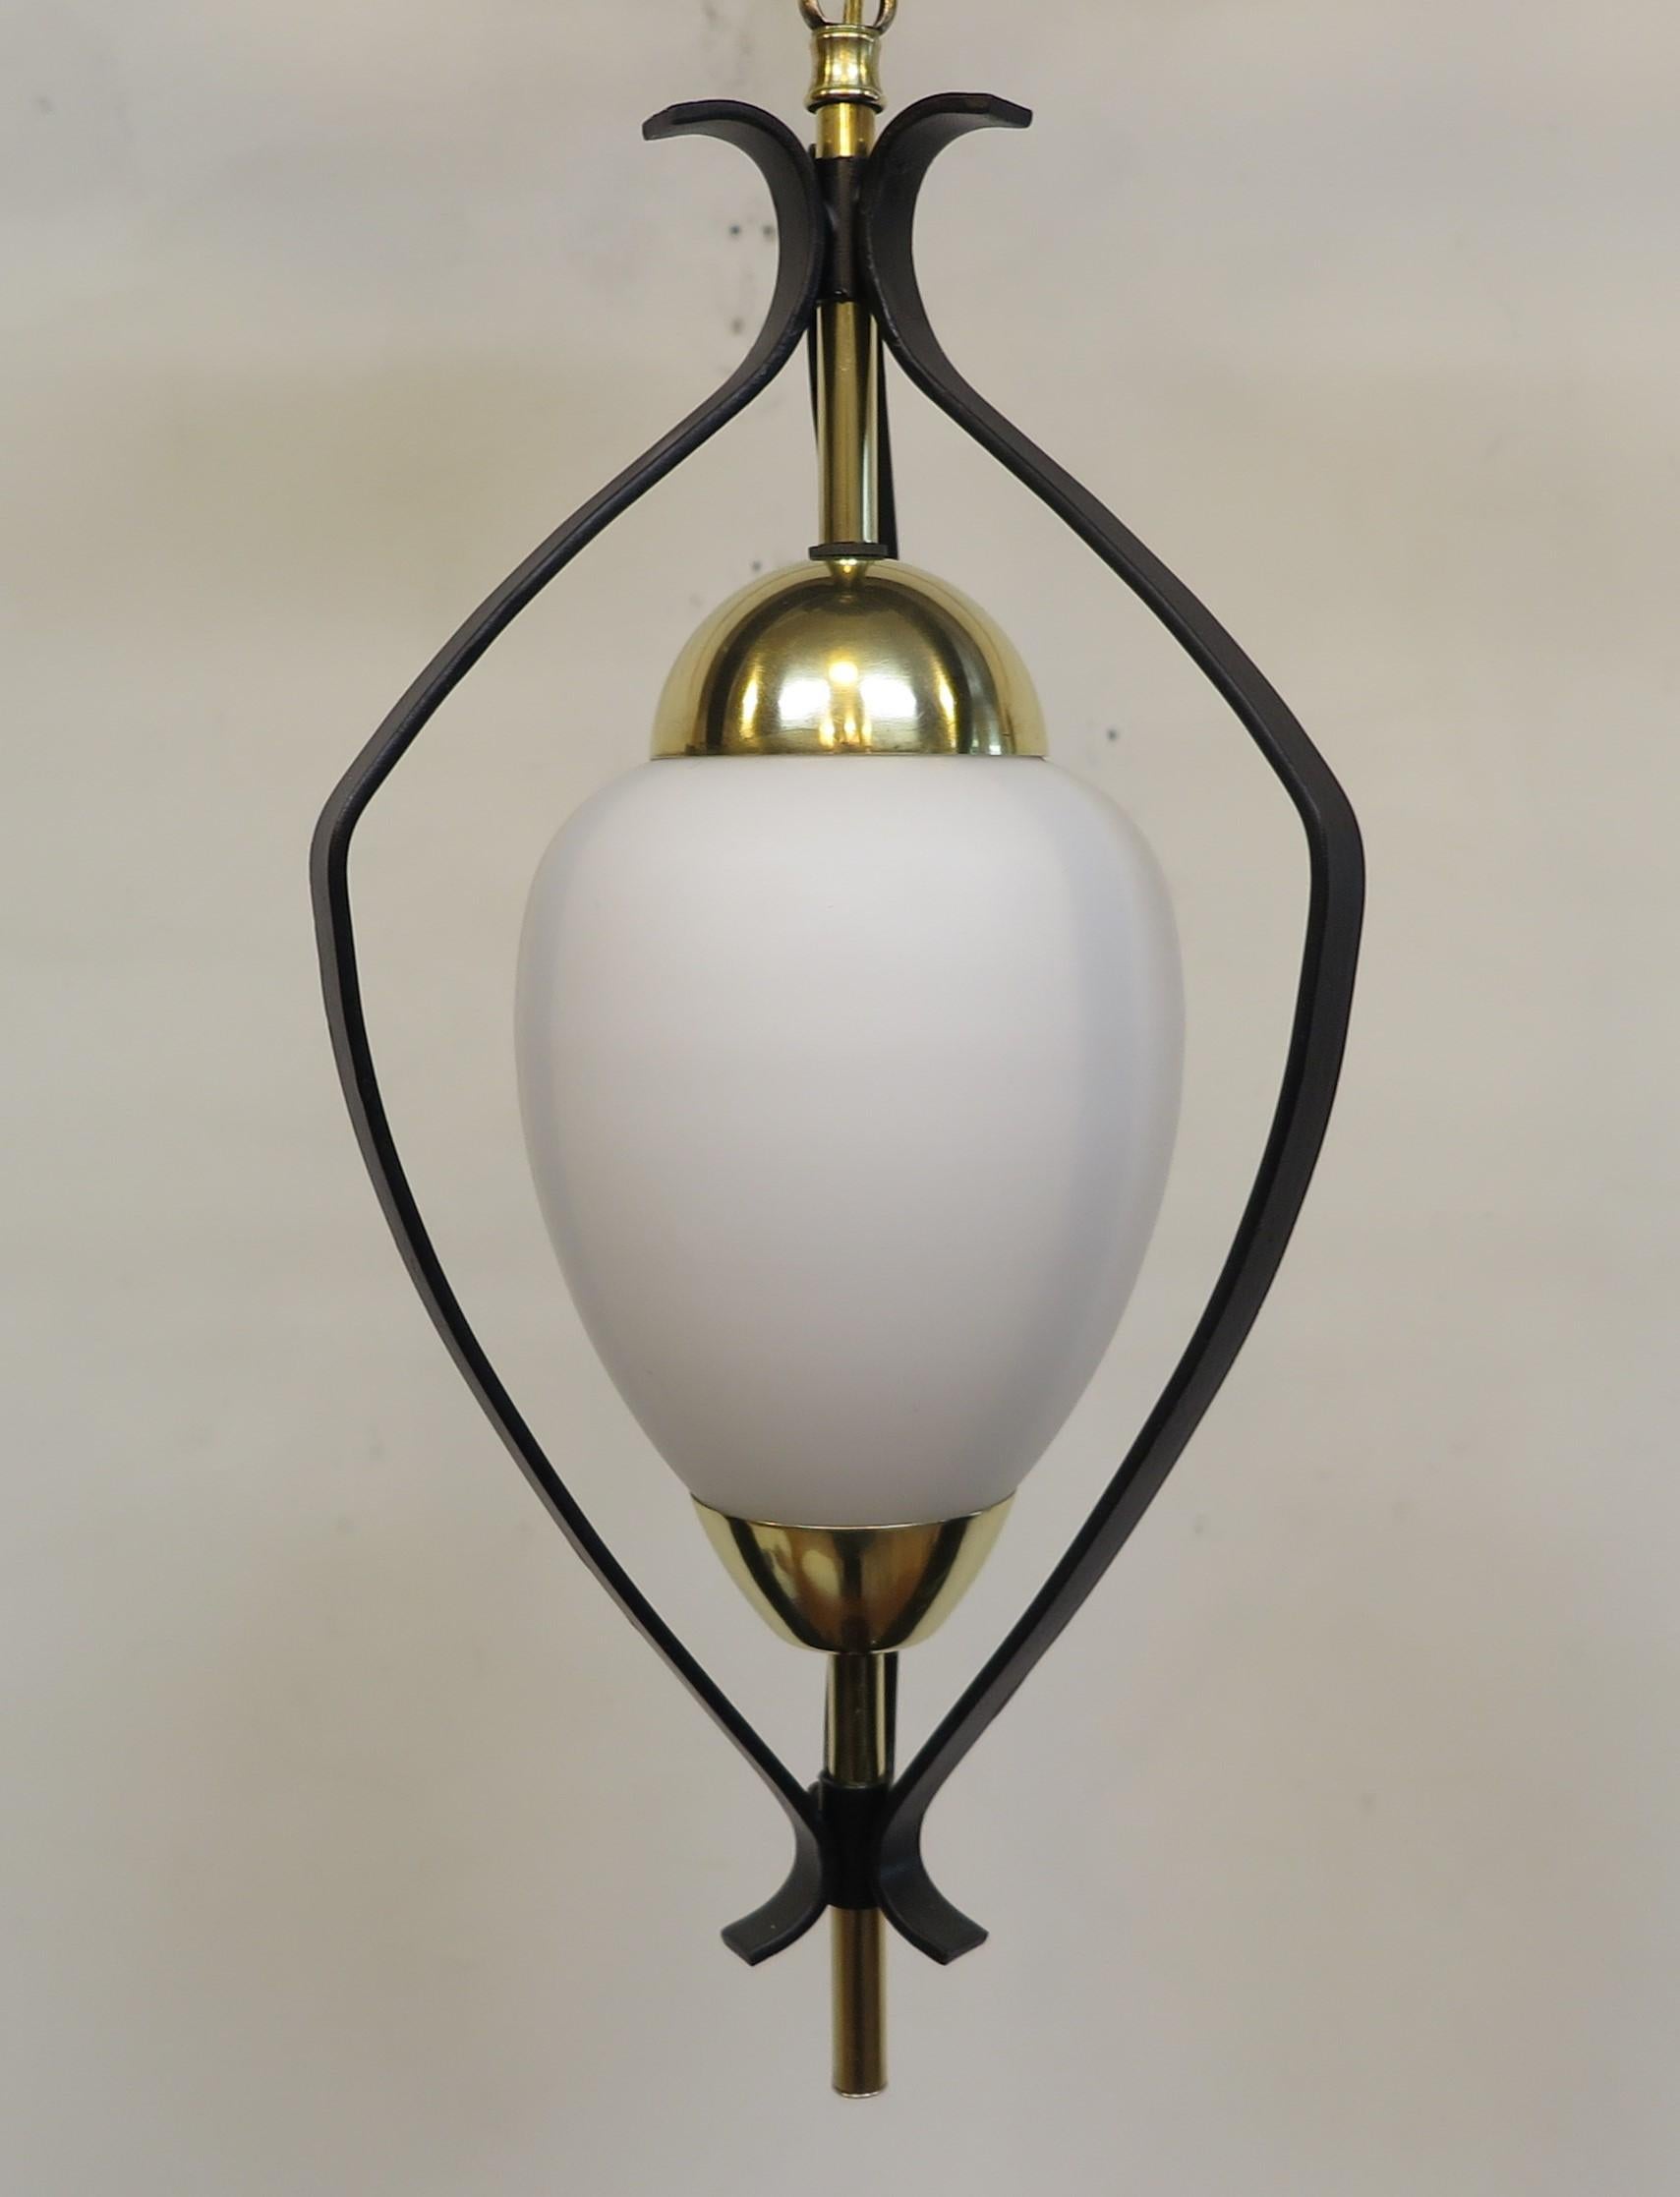 French mid-century pendent light by Maison Arlus. Mid-Century Modern French pendent lantern style hanging light. Frosted milk glass shade set in between brass caps on brass rods suspended in a modern lantern style Iron fixture. Hard to find these